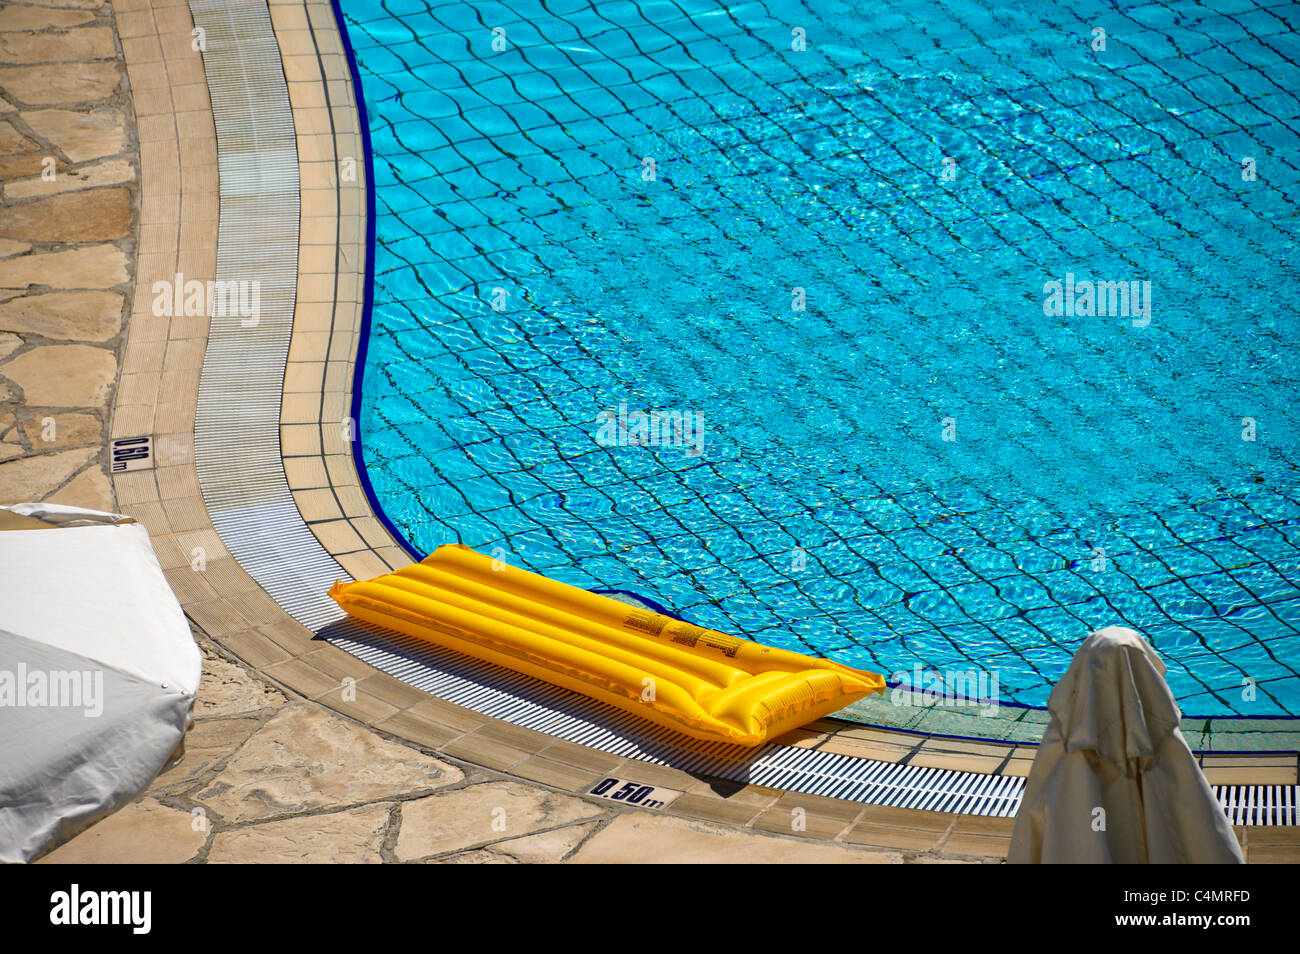 Hotel swimming pool and inflatable lilo. Stock Photo